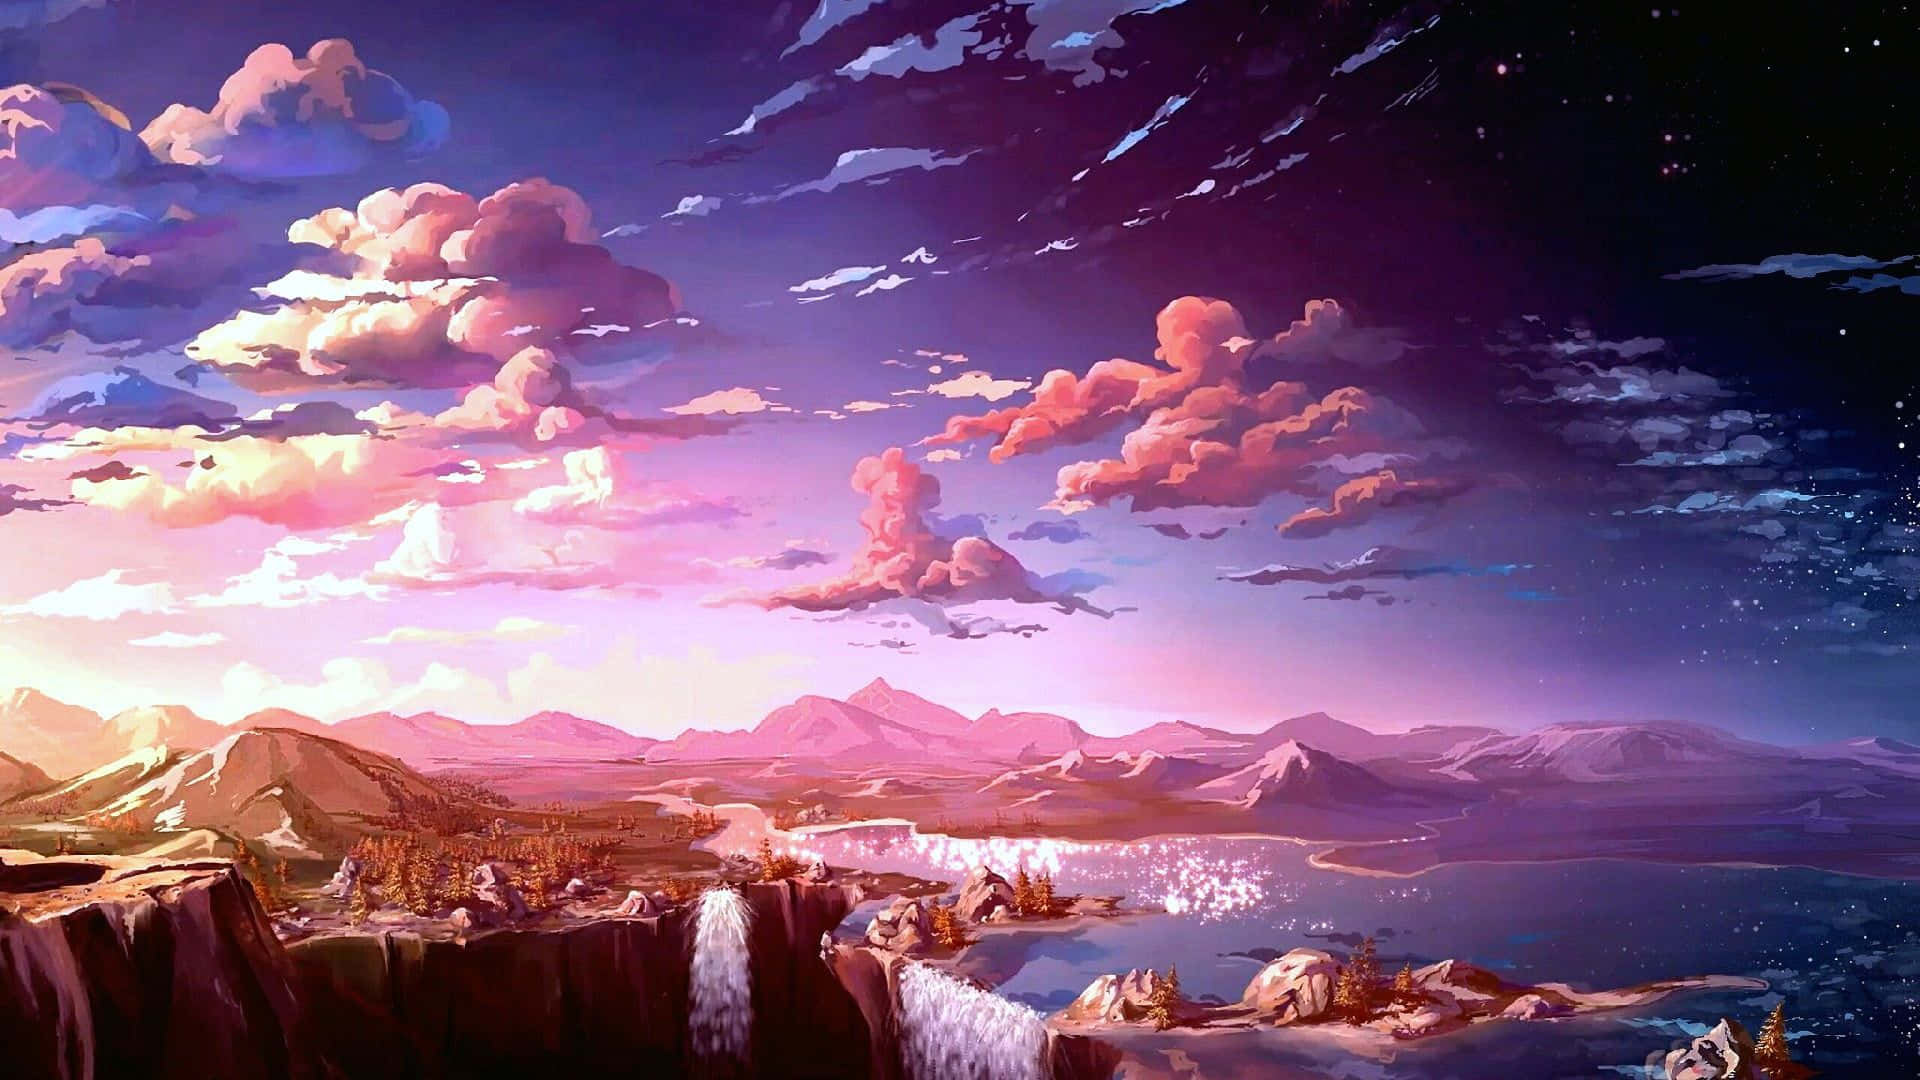  PS4 Hintergrundbild 1920x1080. Download Anime Aesthetic Sky With Clouds Ps4 Wallpaper